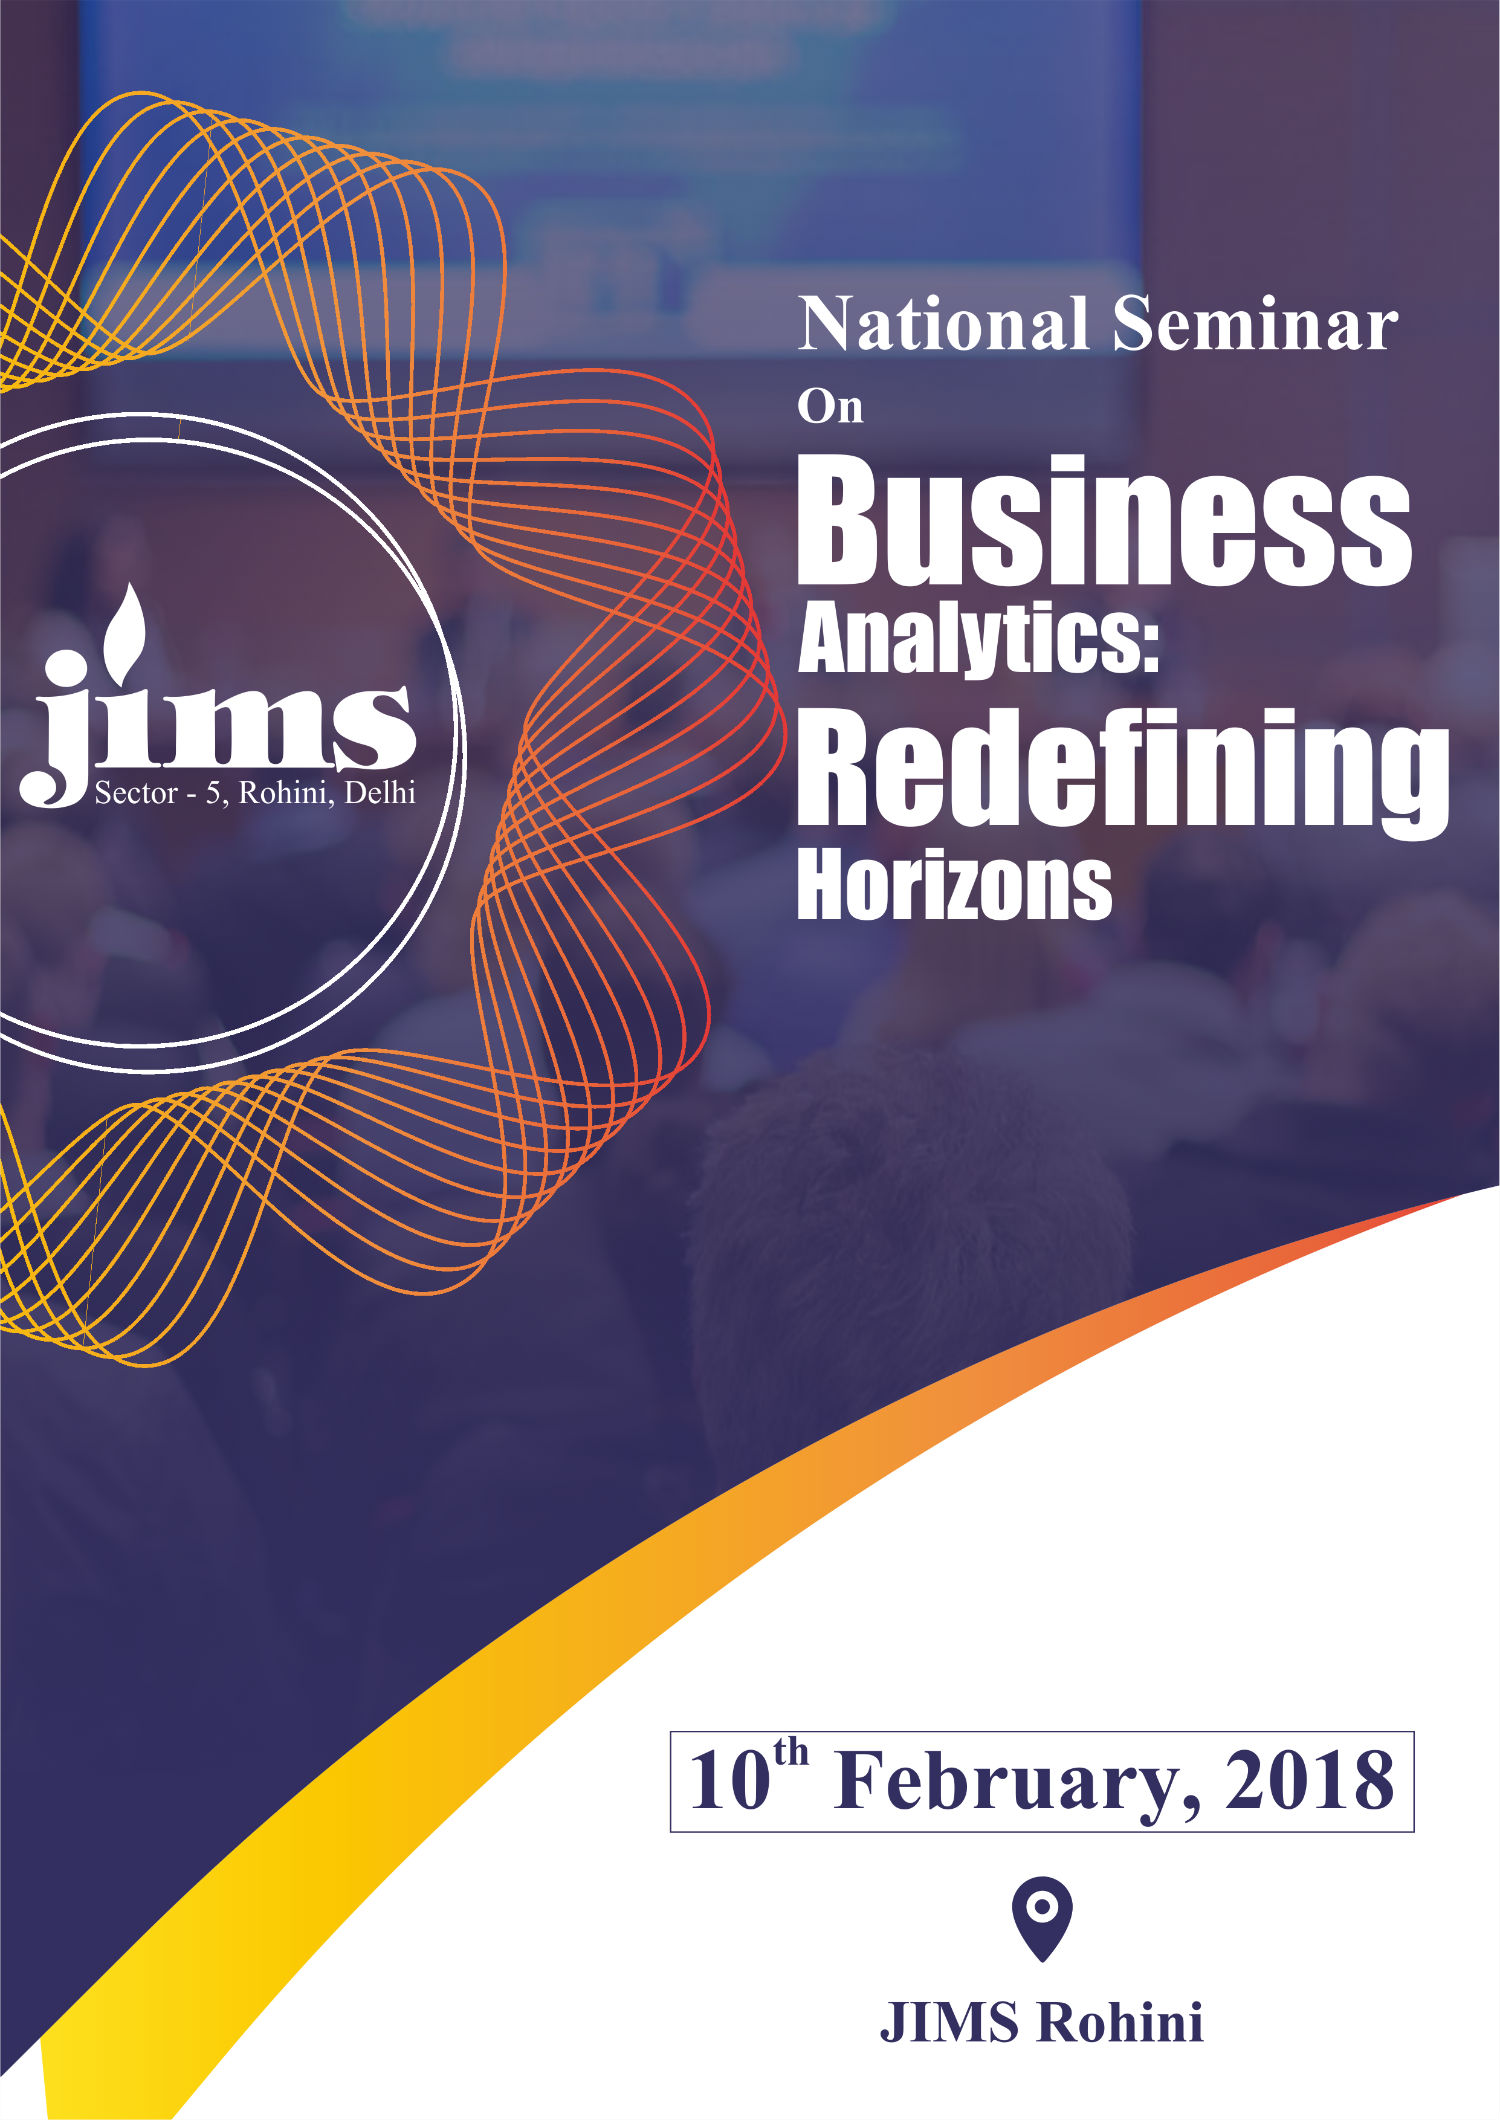 JIMS is organizing a NATIONAL SEMINAR On Business Analytics Redefining Horizons